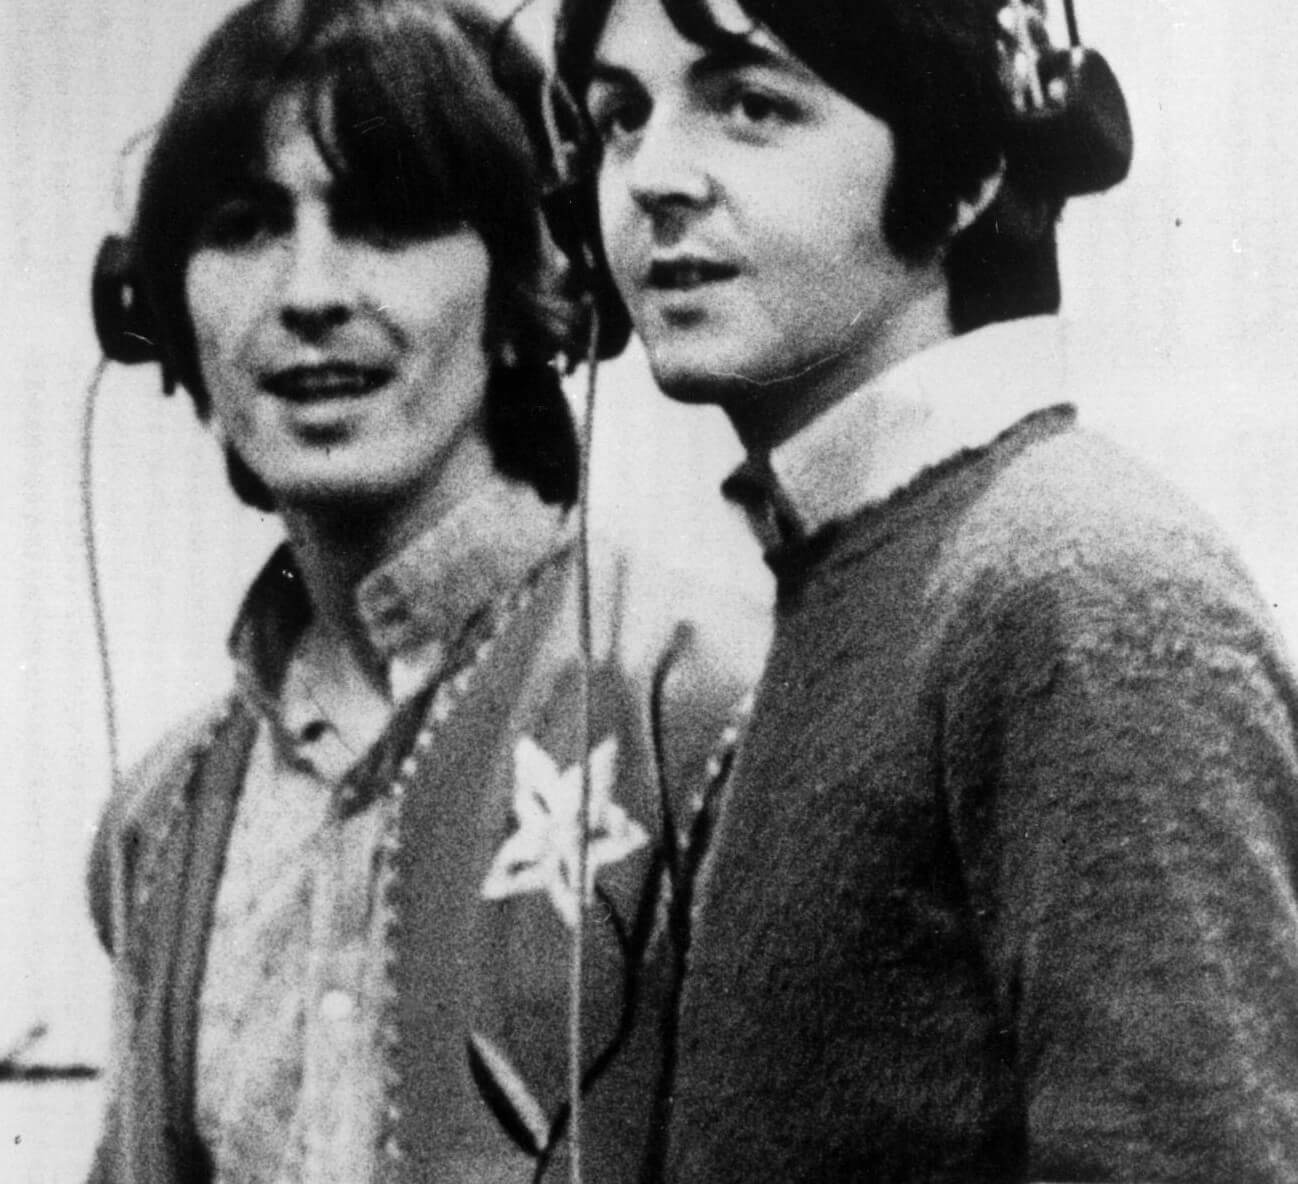 The Beatles' George Harrison and Paul McCartney in black-and-white